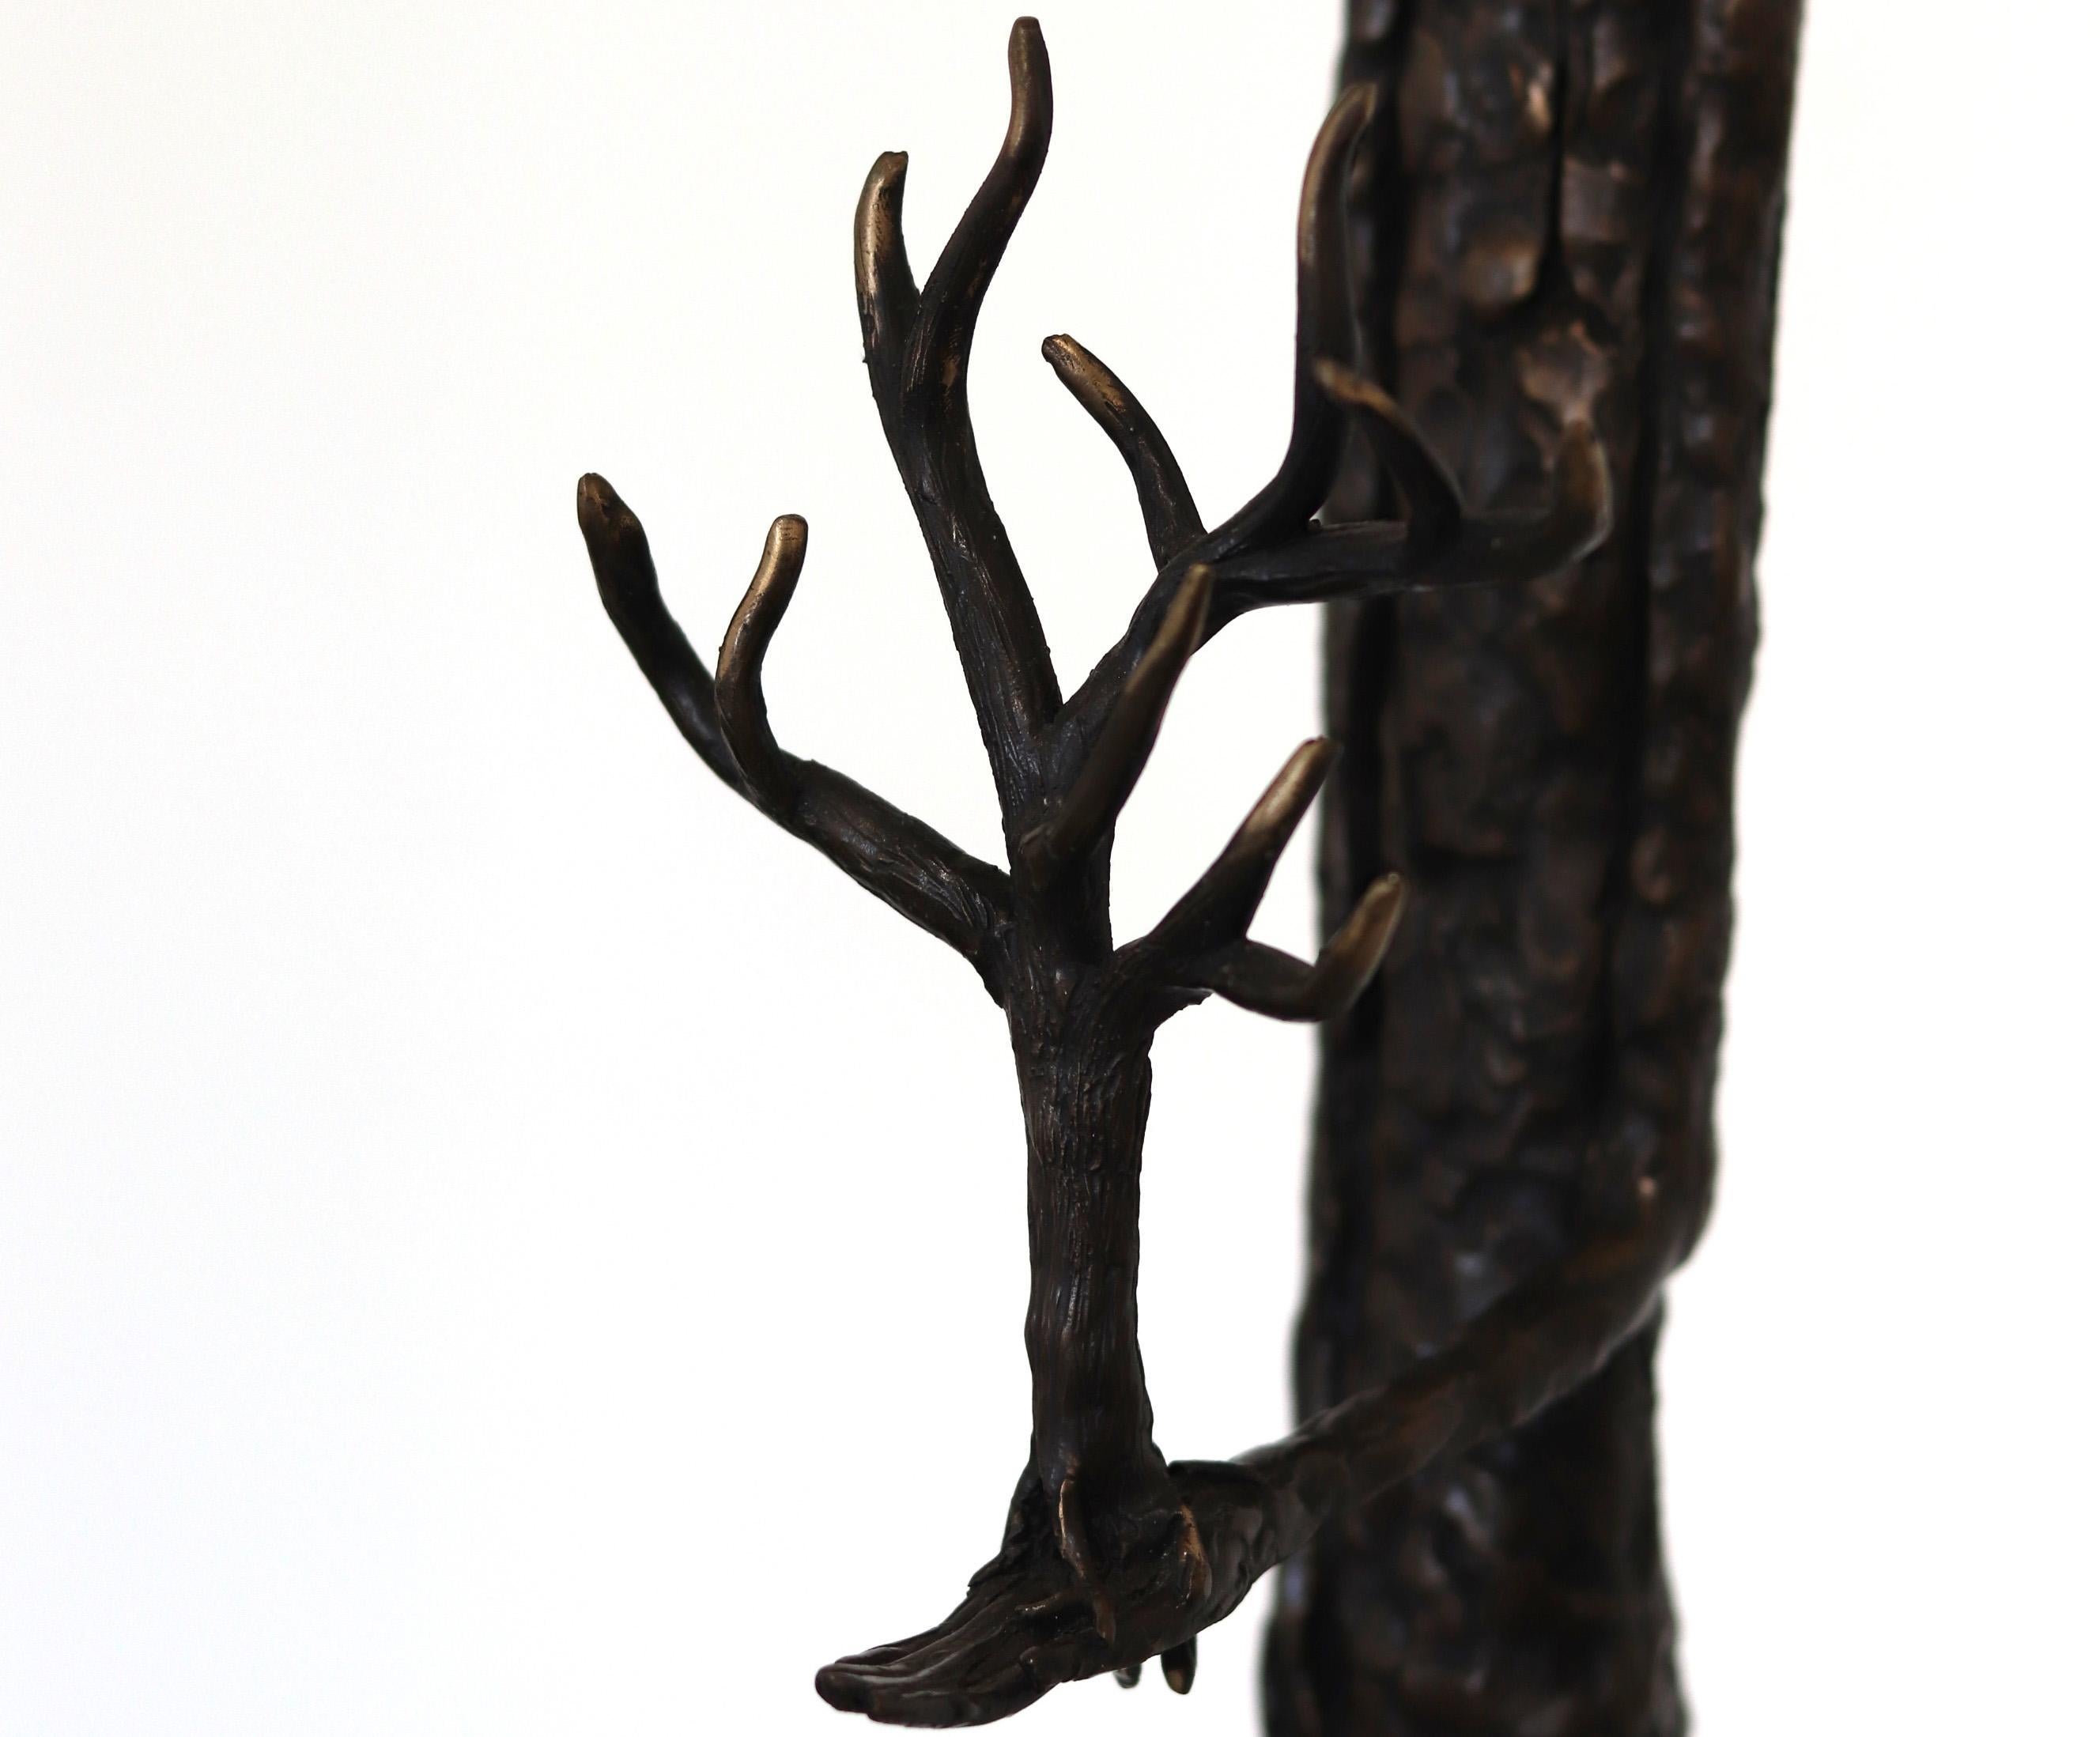 Giving Tree - maquette (20/35) - Contemporary Mixed Media Art by Jennyfer Stratman